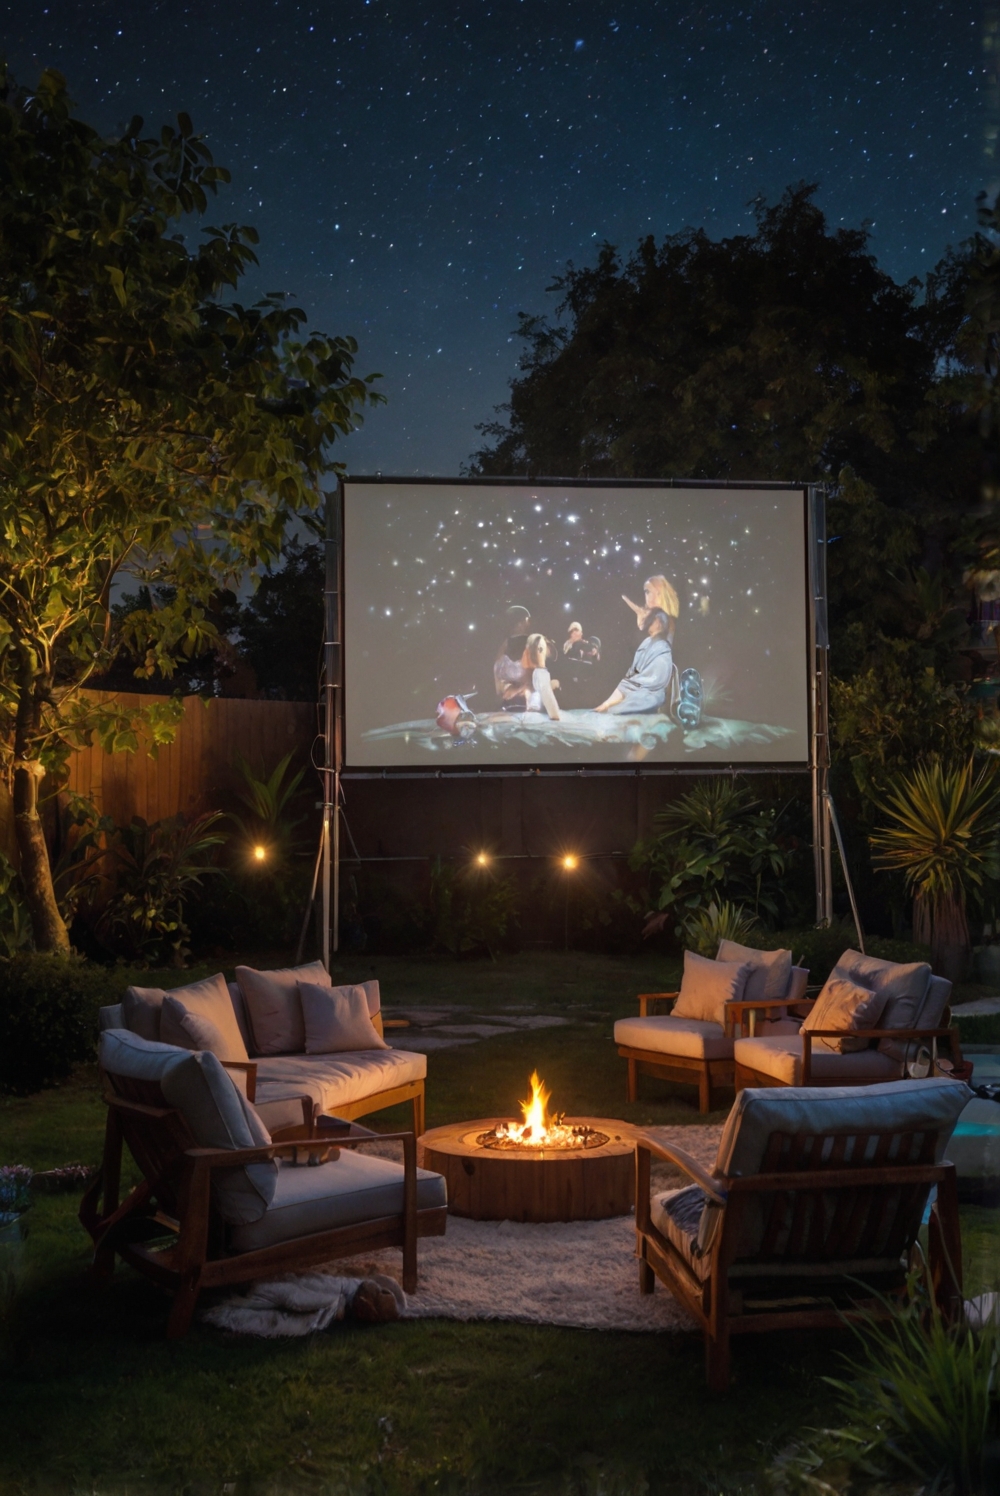 outdoor cinema setup, backyard movie night, outdoor movie experience, movie night under the stars, create cinema oasis, outdoor movie magic, cozy outdoor movie night home decorating ideas, home interior design, space planning services, interior bedroom design, kitchen designs, living room interior decor, wall paint selection